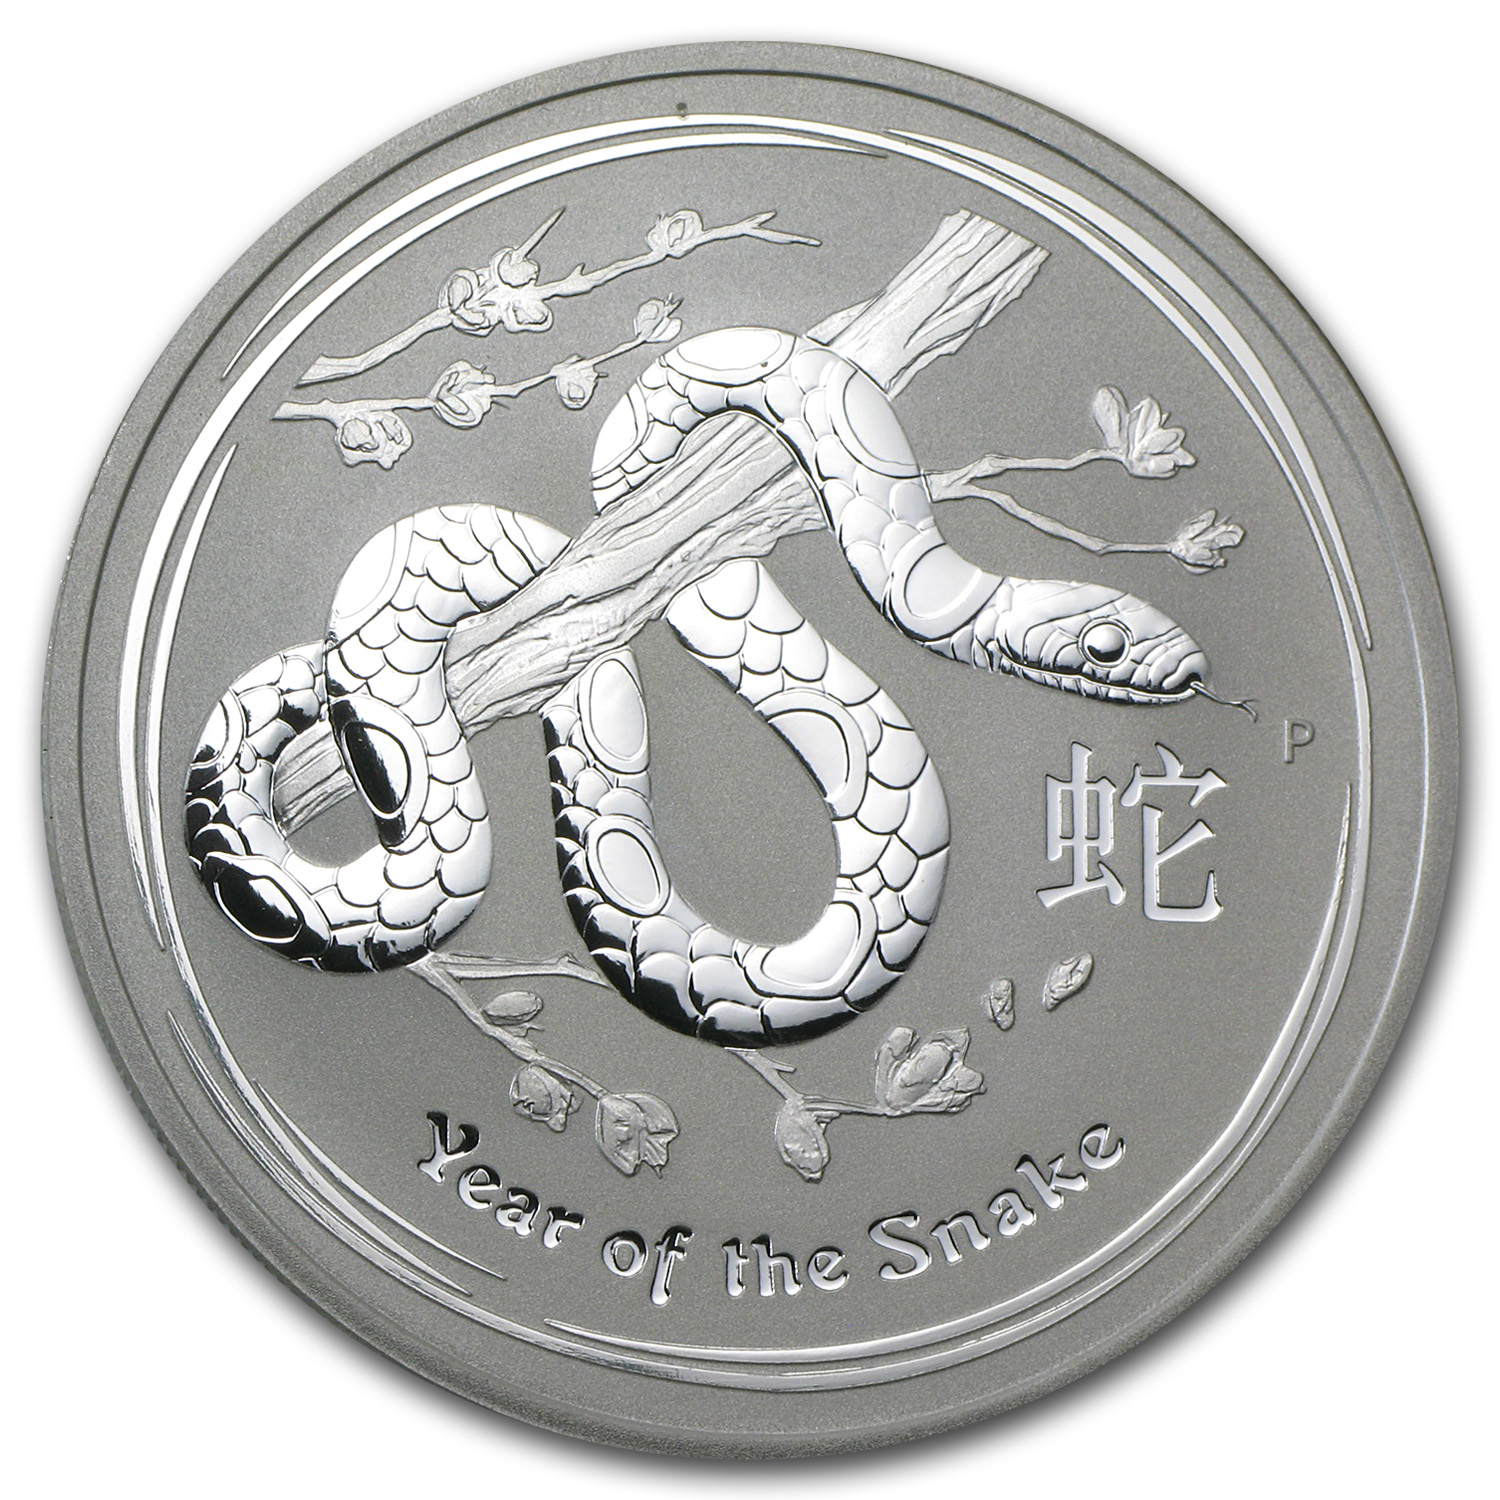 .999 Silver with Capsule 2013 Year of the Snake Colorized $1 Australia 1 oz 